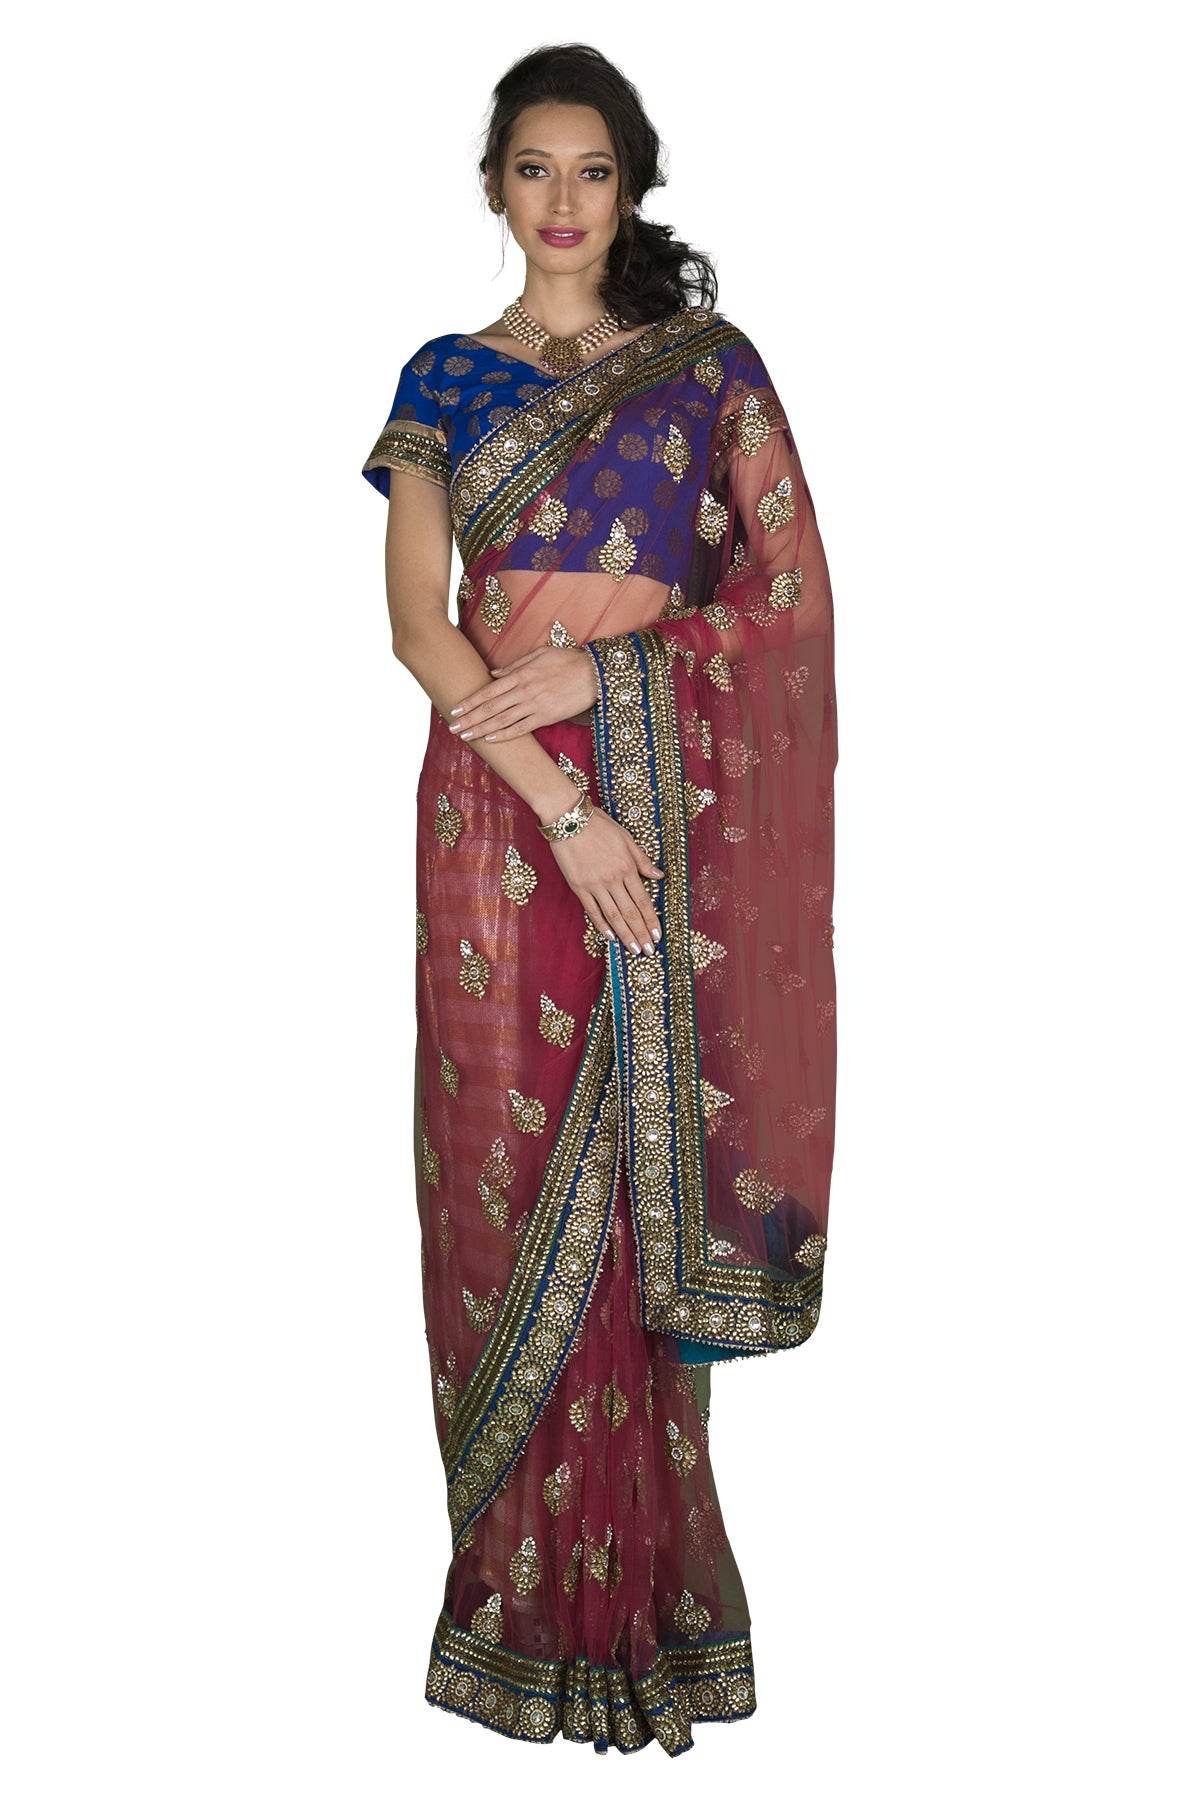 Maroon net saree with gold border and a brocade blue blouse. Please note that the petticoat is not included.
